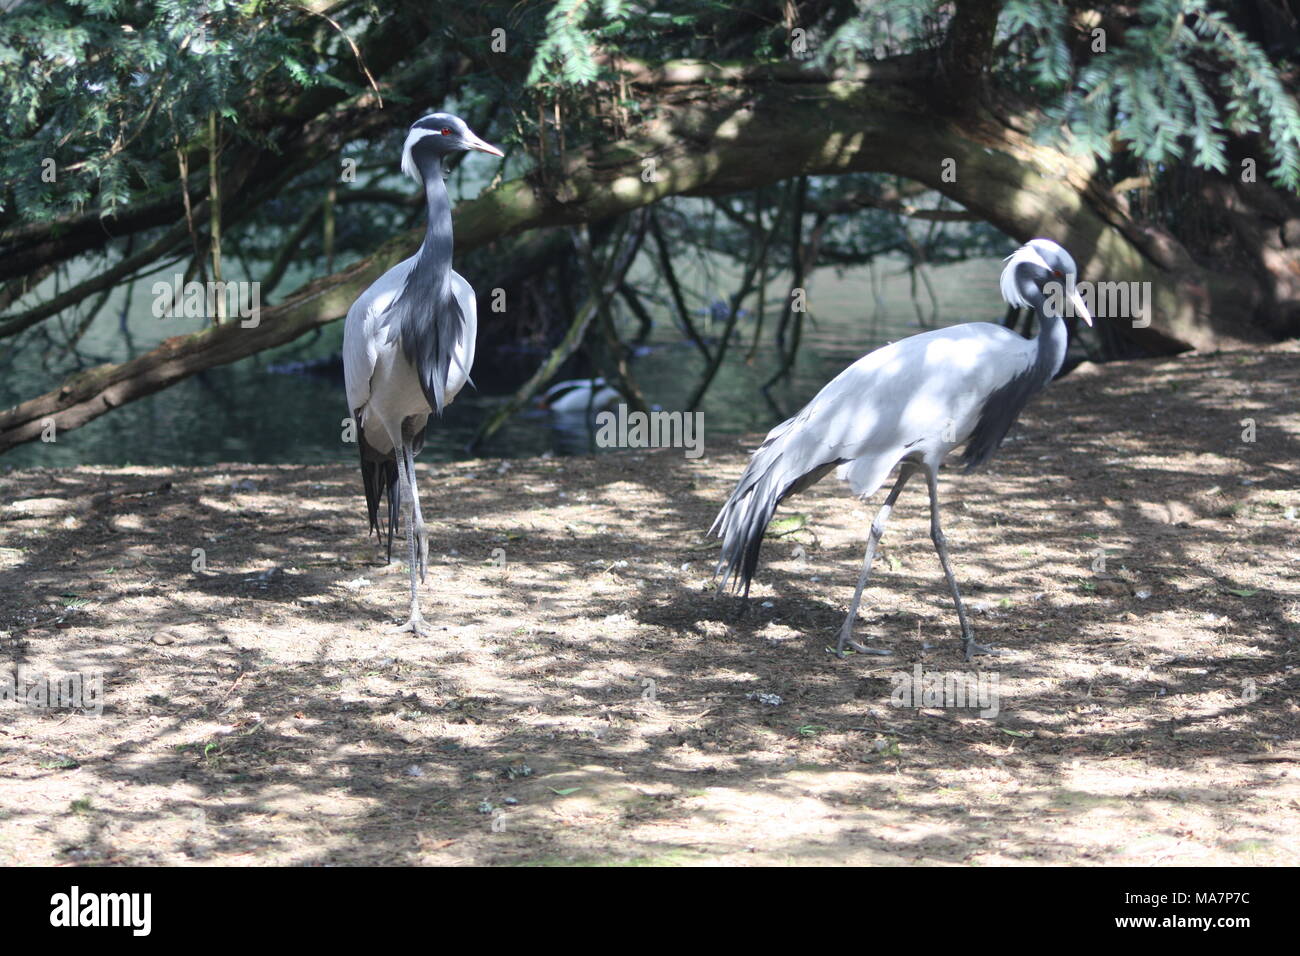 A pair of Demoiselle cranes walking in some gardens. Stock Photo